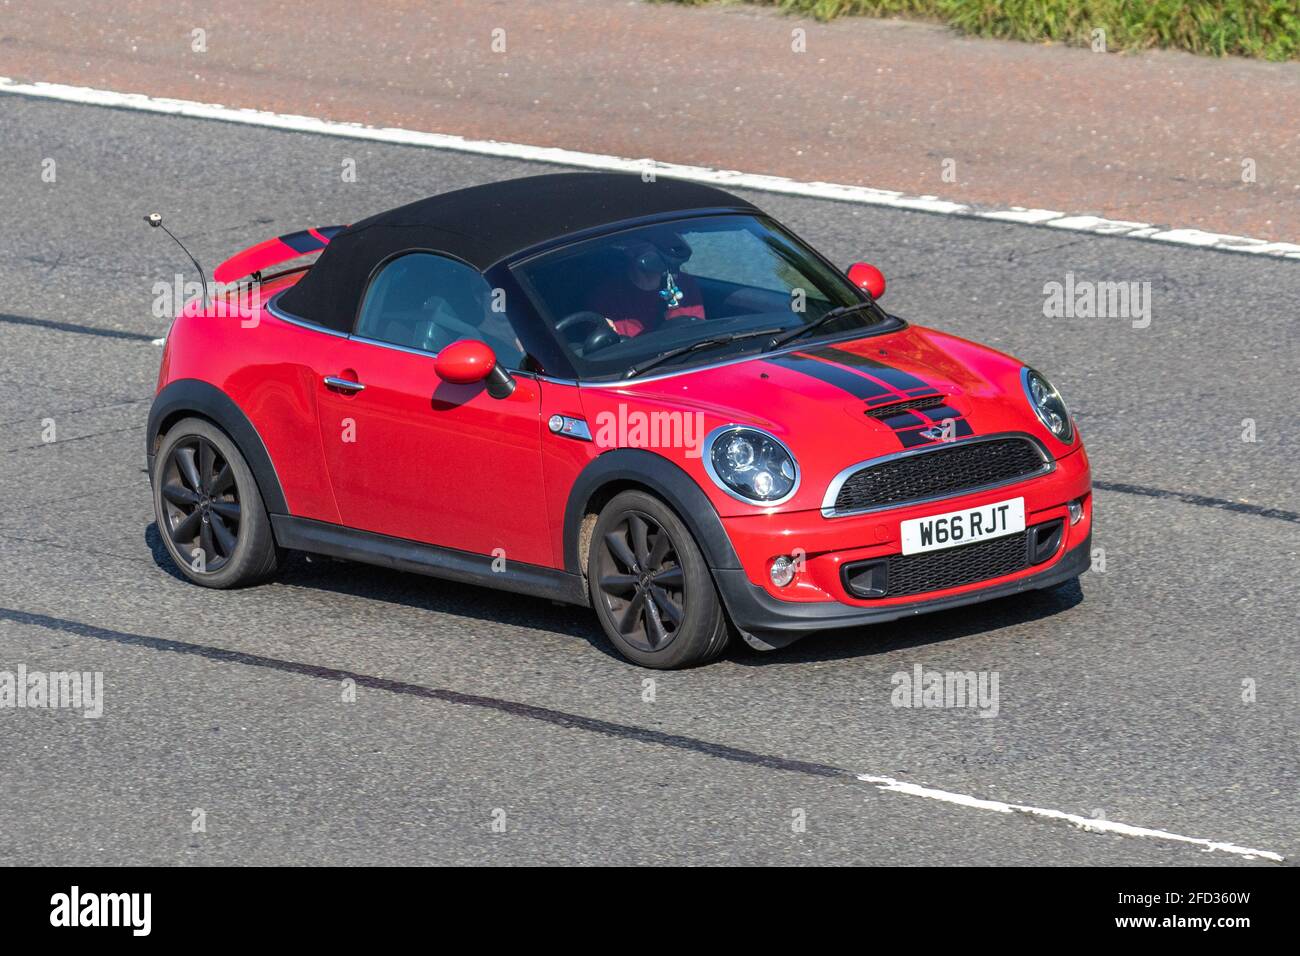 2013 red mini Roadster 1598cc moving vehicles, cars, vehicle driving on UK roads, motors, motoring on the M6 English motorway road network Stock Photo